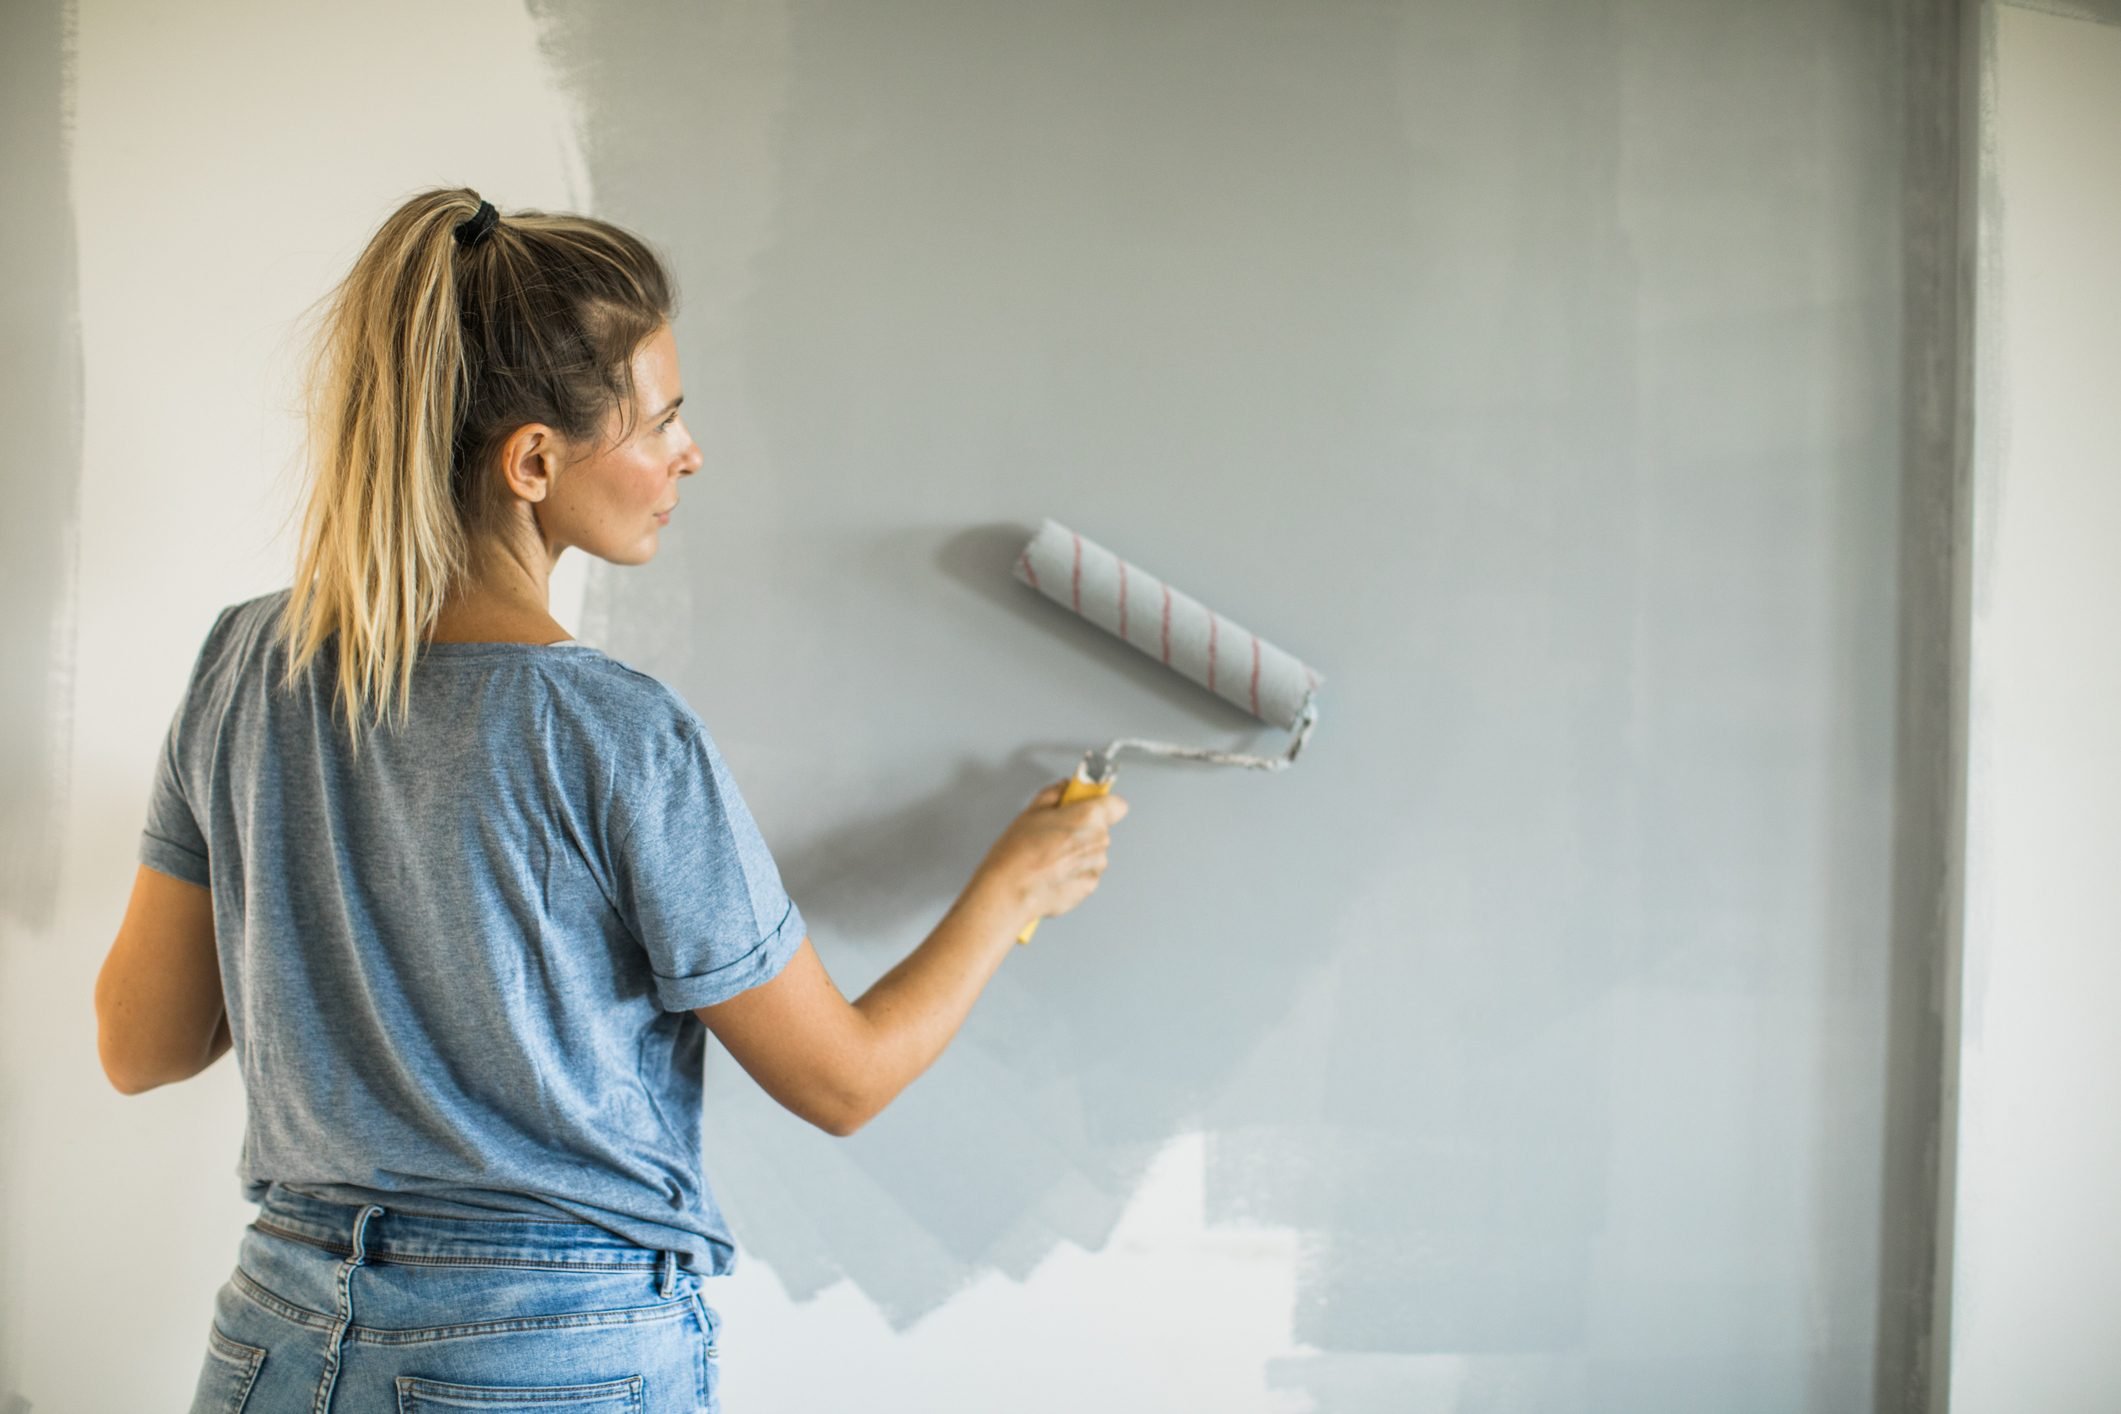 The best tasks for a small paint roller